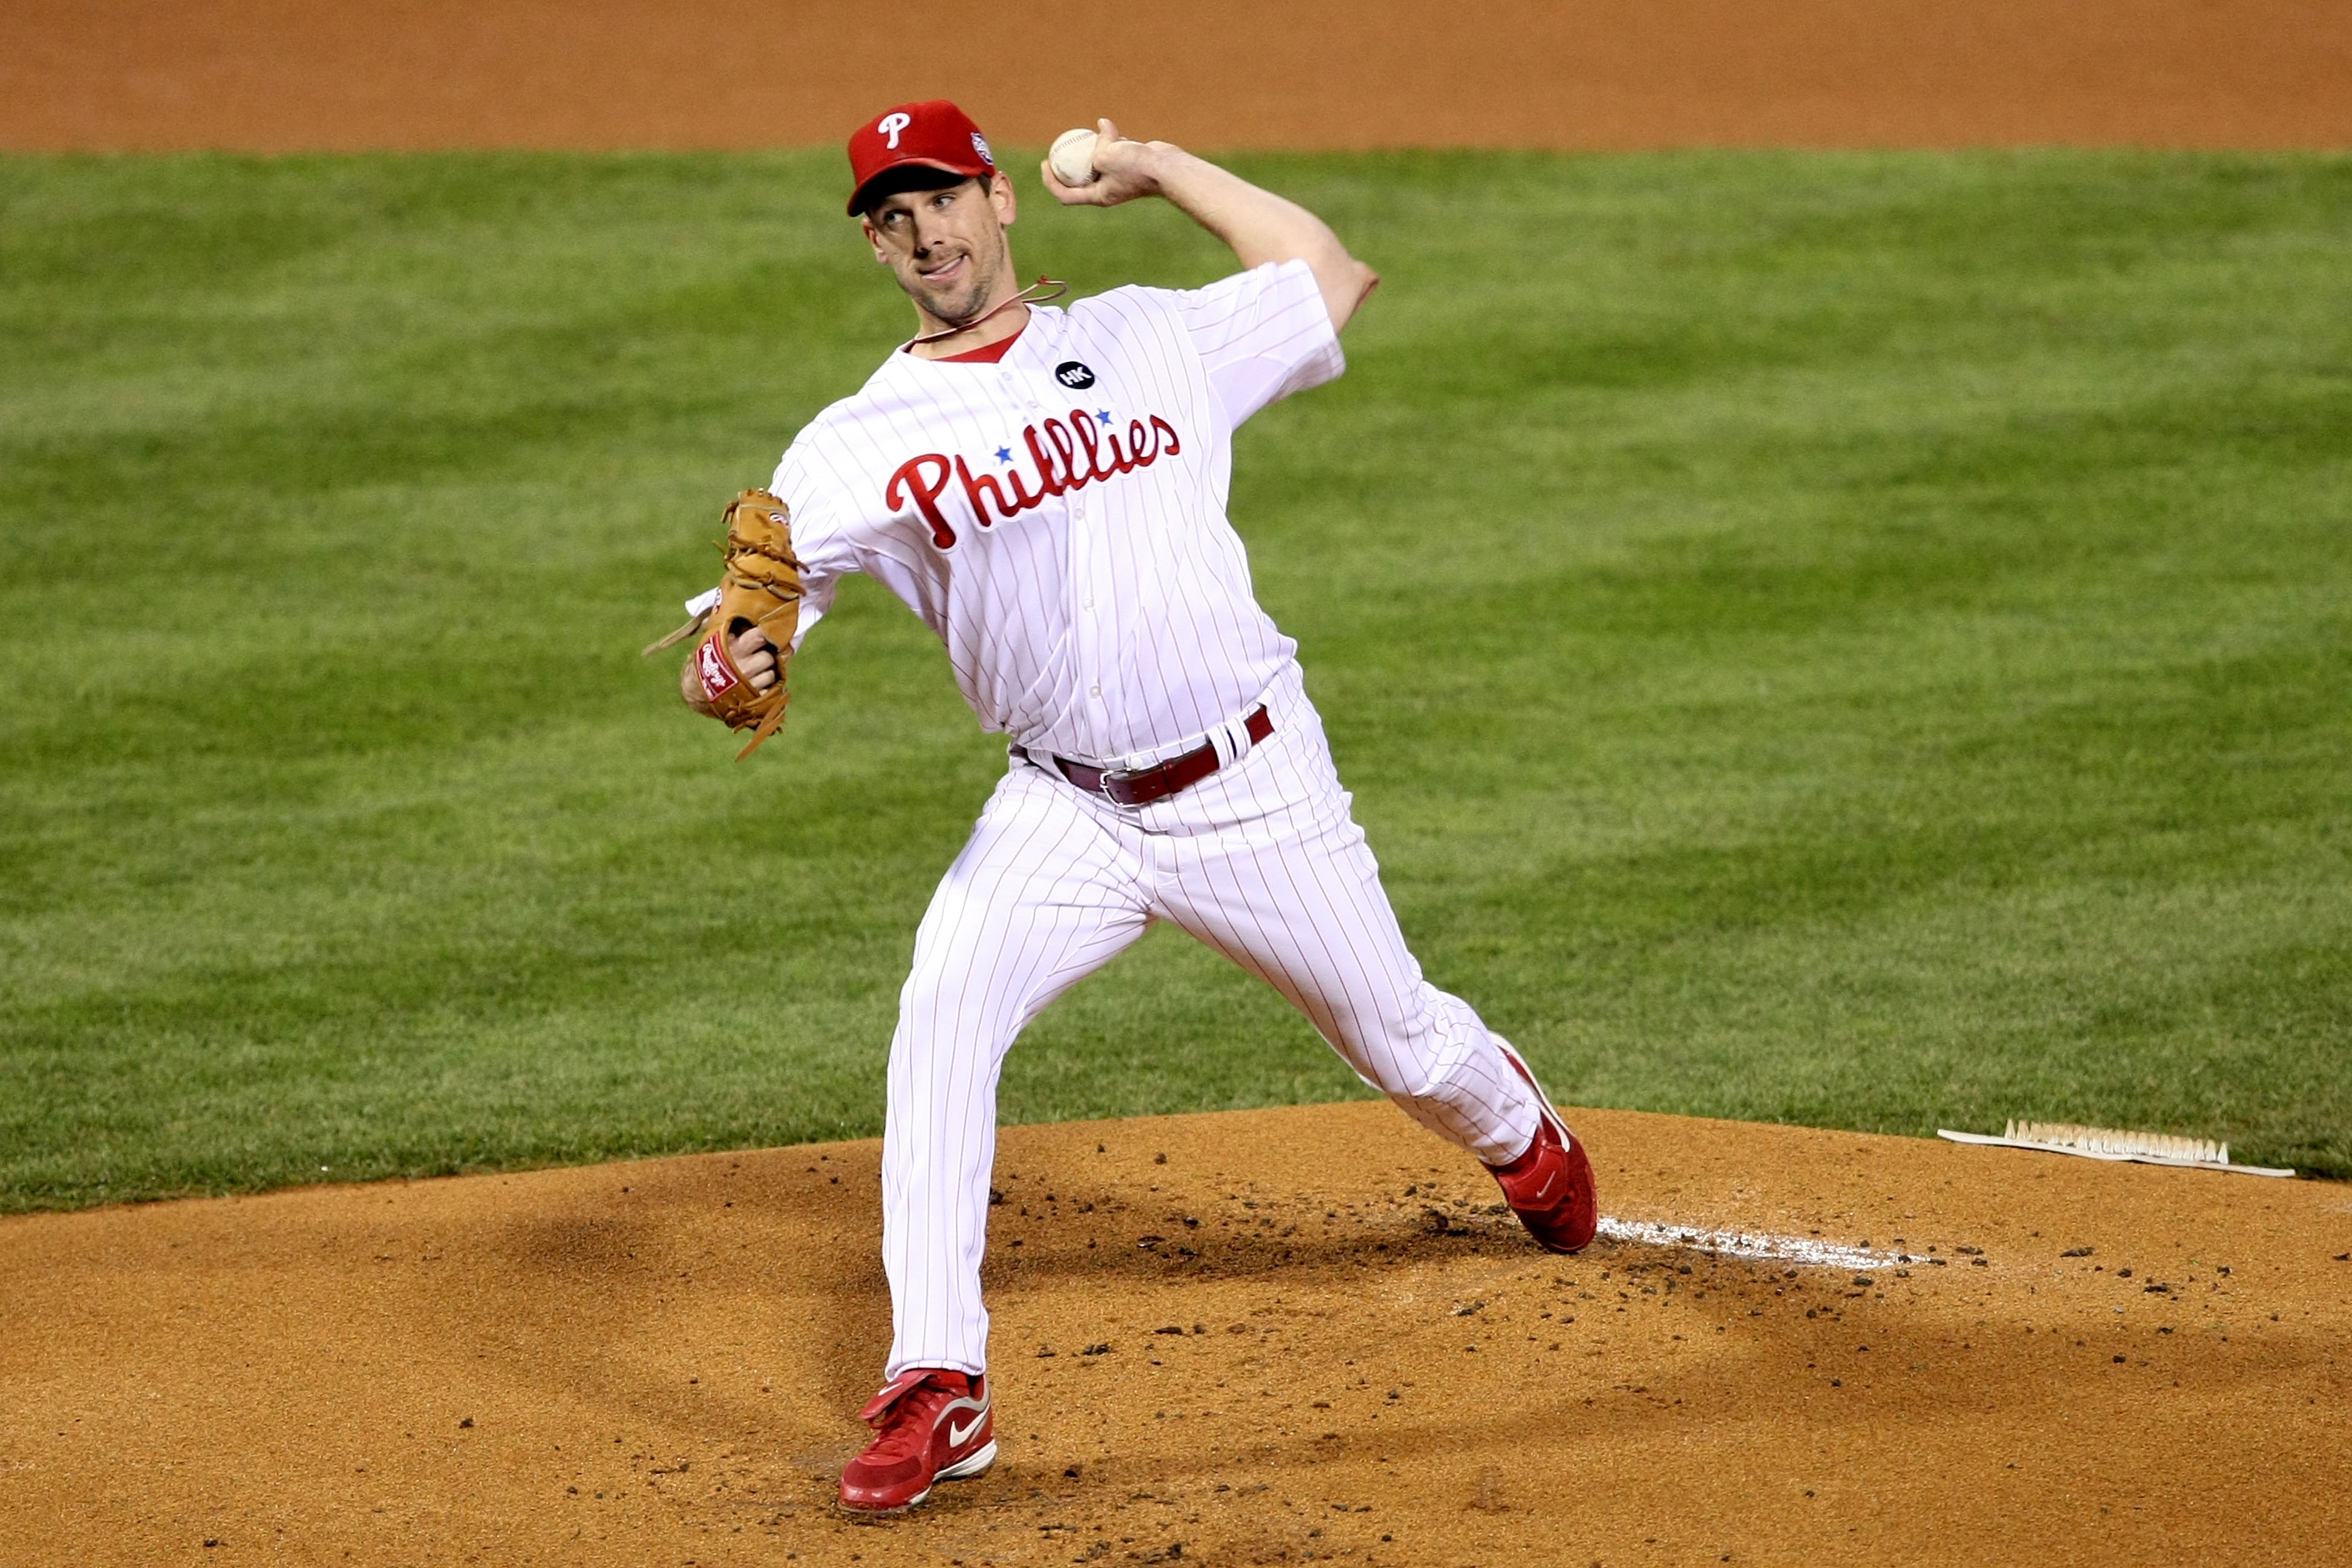 Cliff Lee To The Phillies: Power Ranking Each Team & World Series